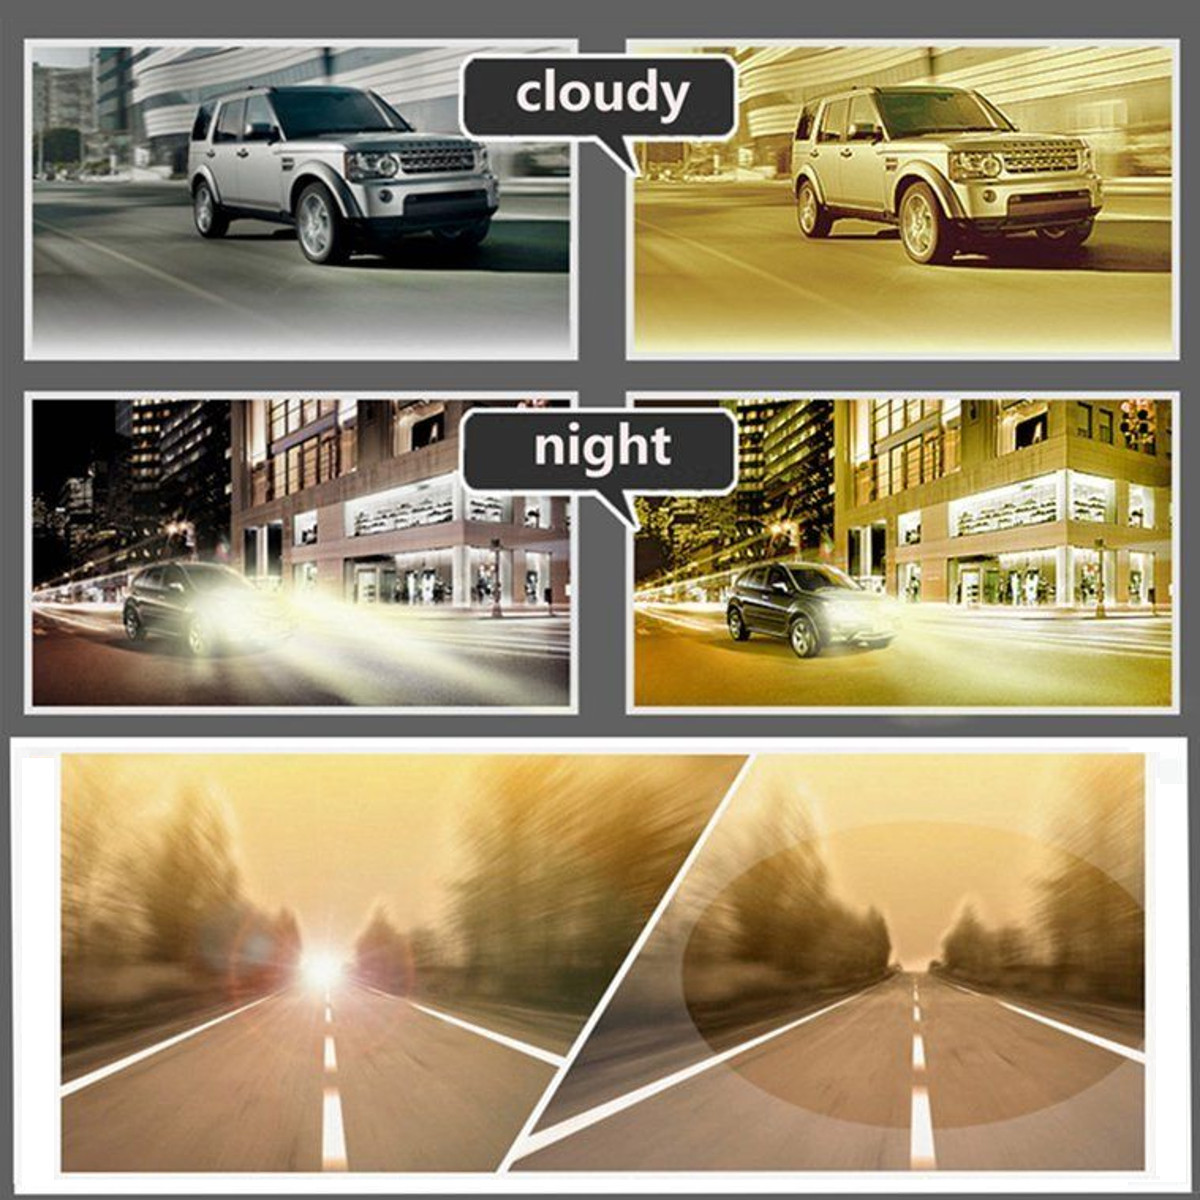 Outdoor-Night-Driving-Glasses-Anti-Glare-Vision-Driver-Safety-Sunglasses-1228638